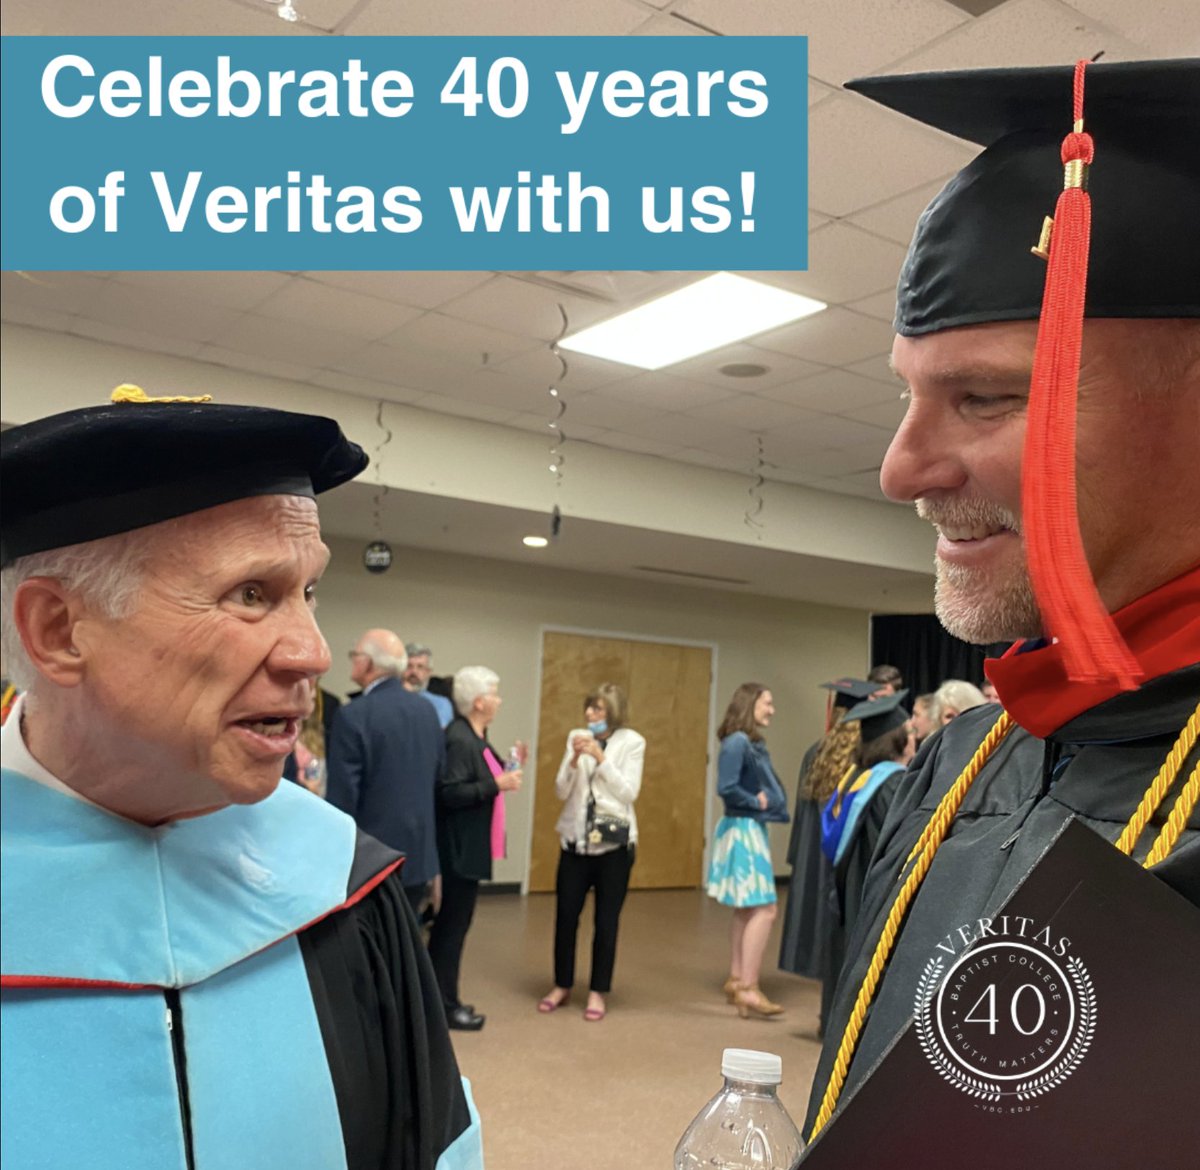 Four weeks from today, VBC graduation takes place in Frederickburg, VA. Would love to see you there! #MinistryTraining #DistanceEducation #Veritas #TruthMatters